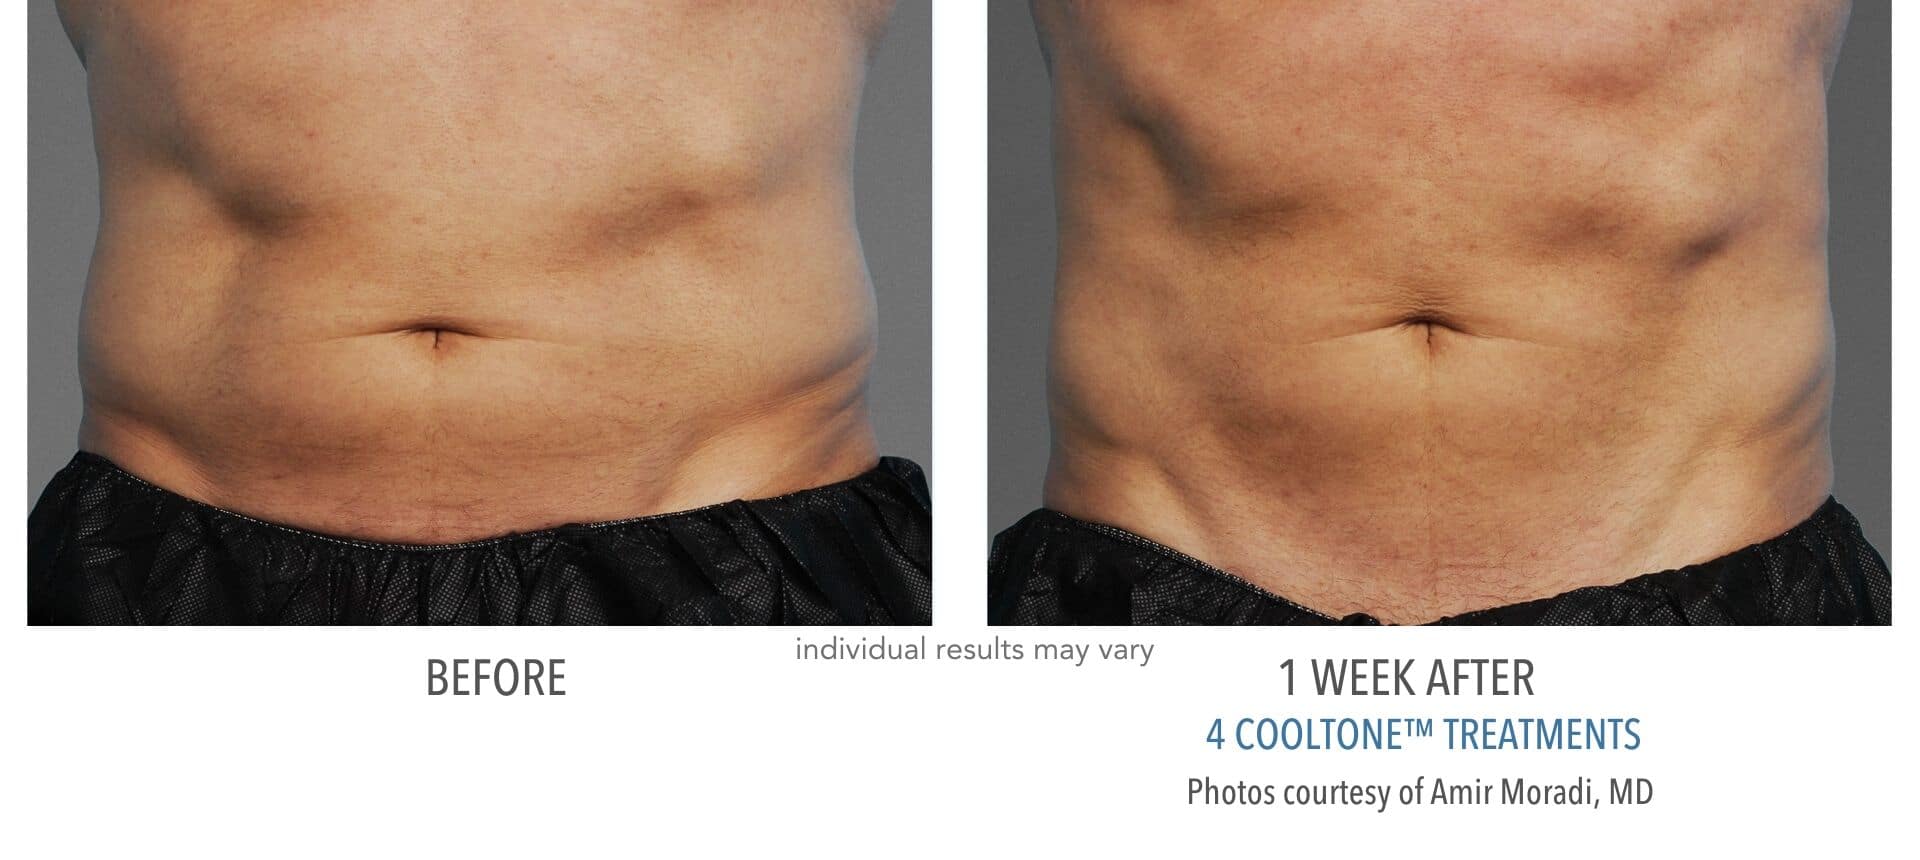 Mans abdomen one week difference before and after cooltone treatment at advanced rejuvenation centers.